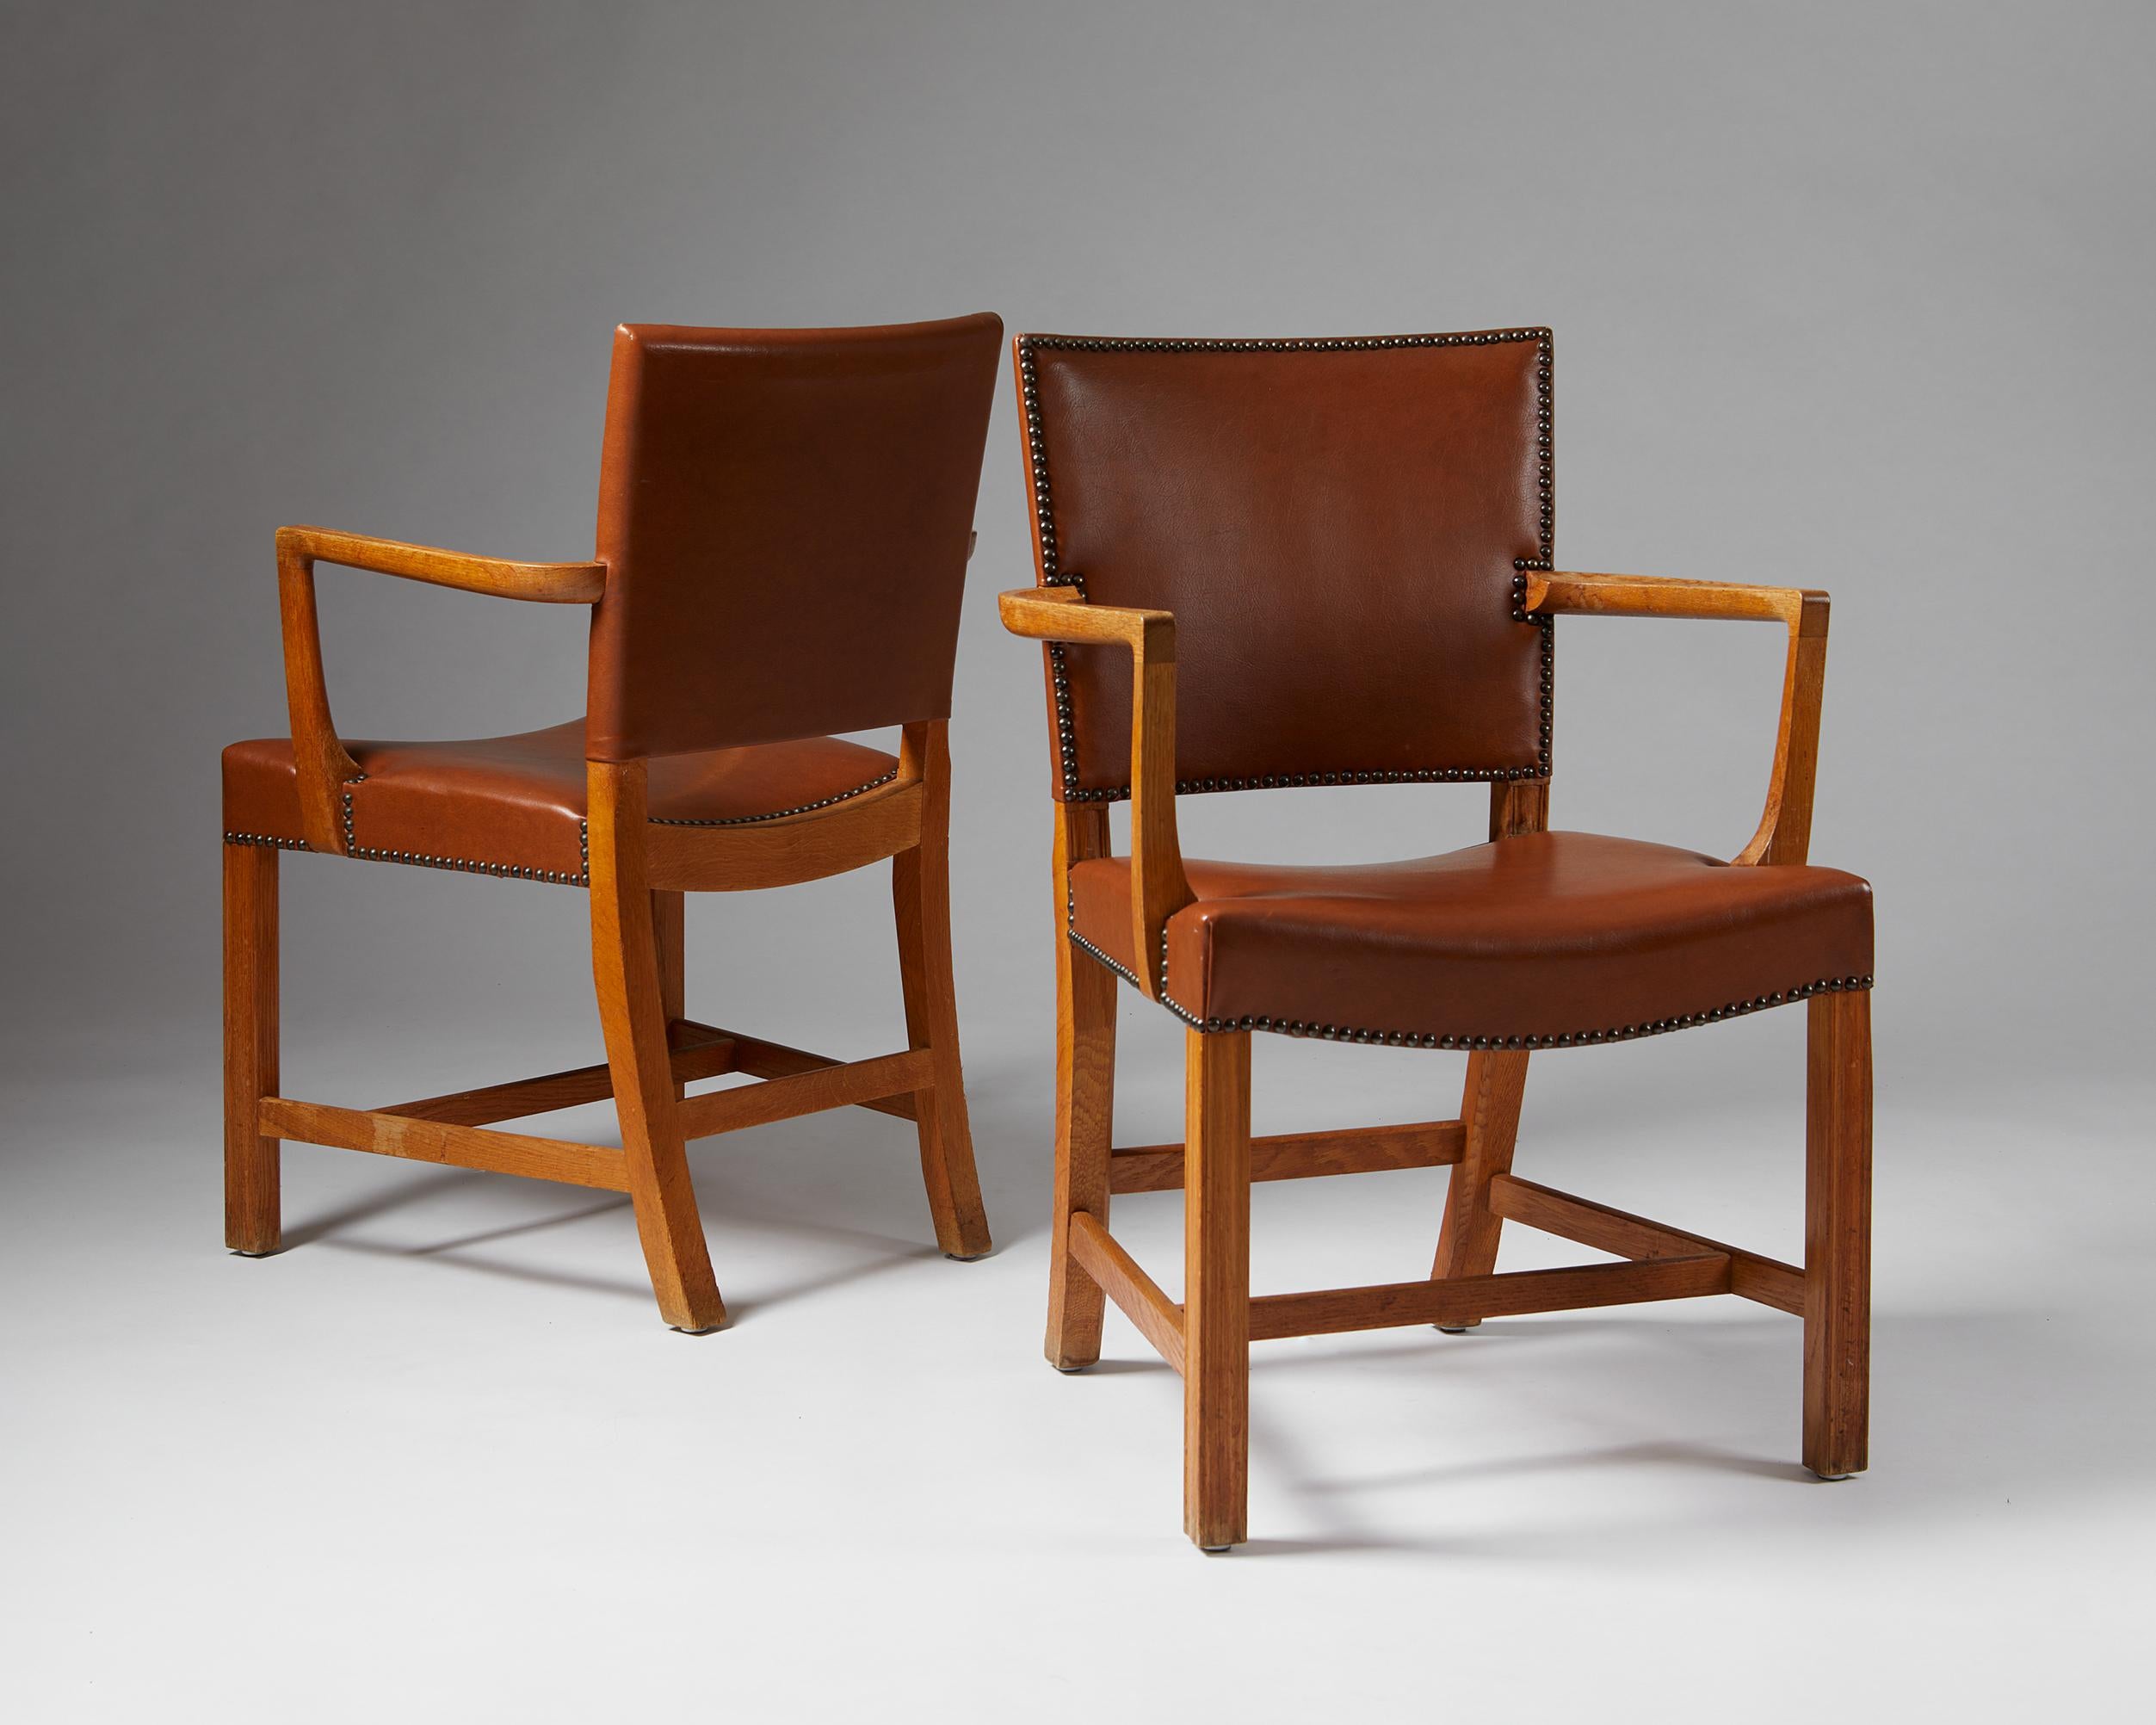 Swedish Pair of Armchairs “The Red Chair” Designed by Kaare Klint for Rud. Rasmussen For Sale